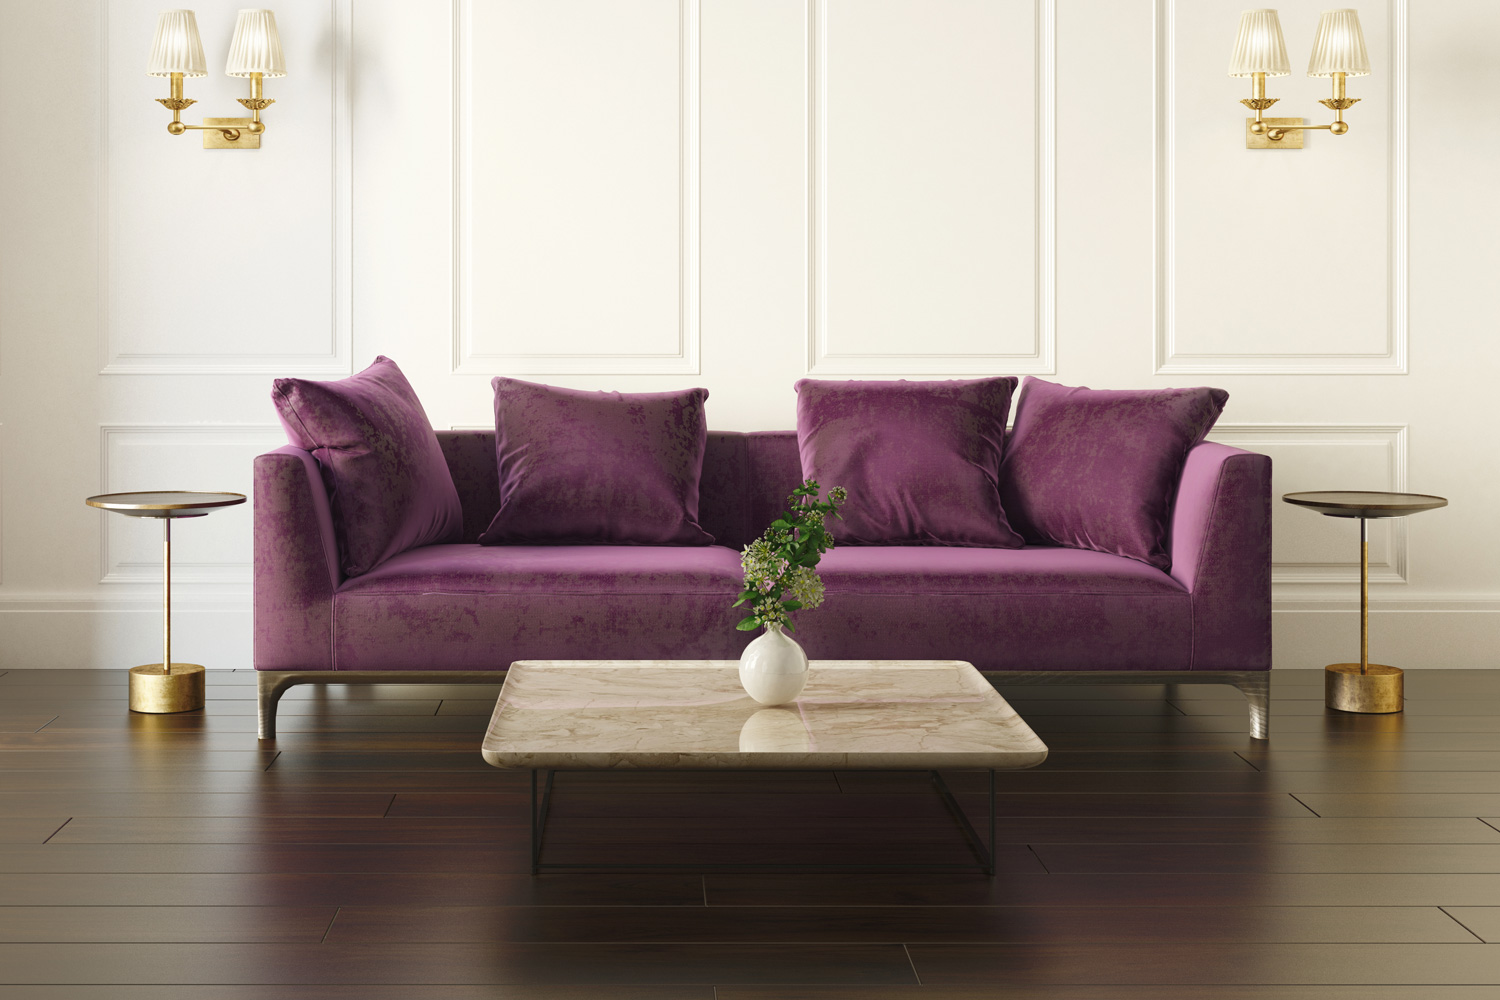 Rendering of a Modern chic classic luxury white European interior with violet velvet sofa